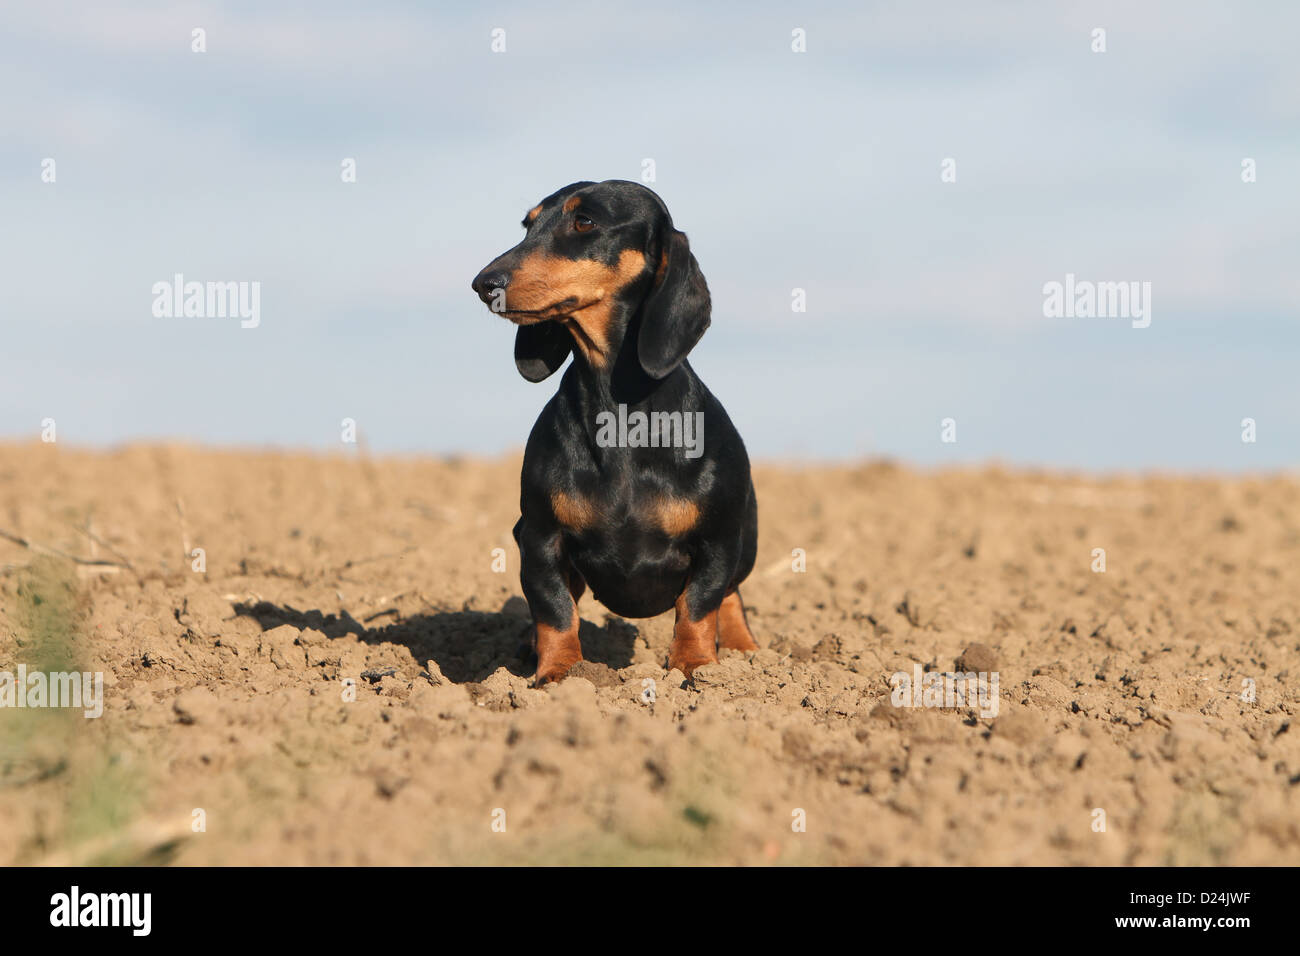 Dog Dachshund /  Dackel / Teckel  shorthaired adult (black and tan) standing in a field Stock Photo